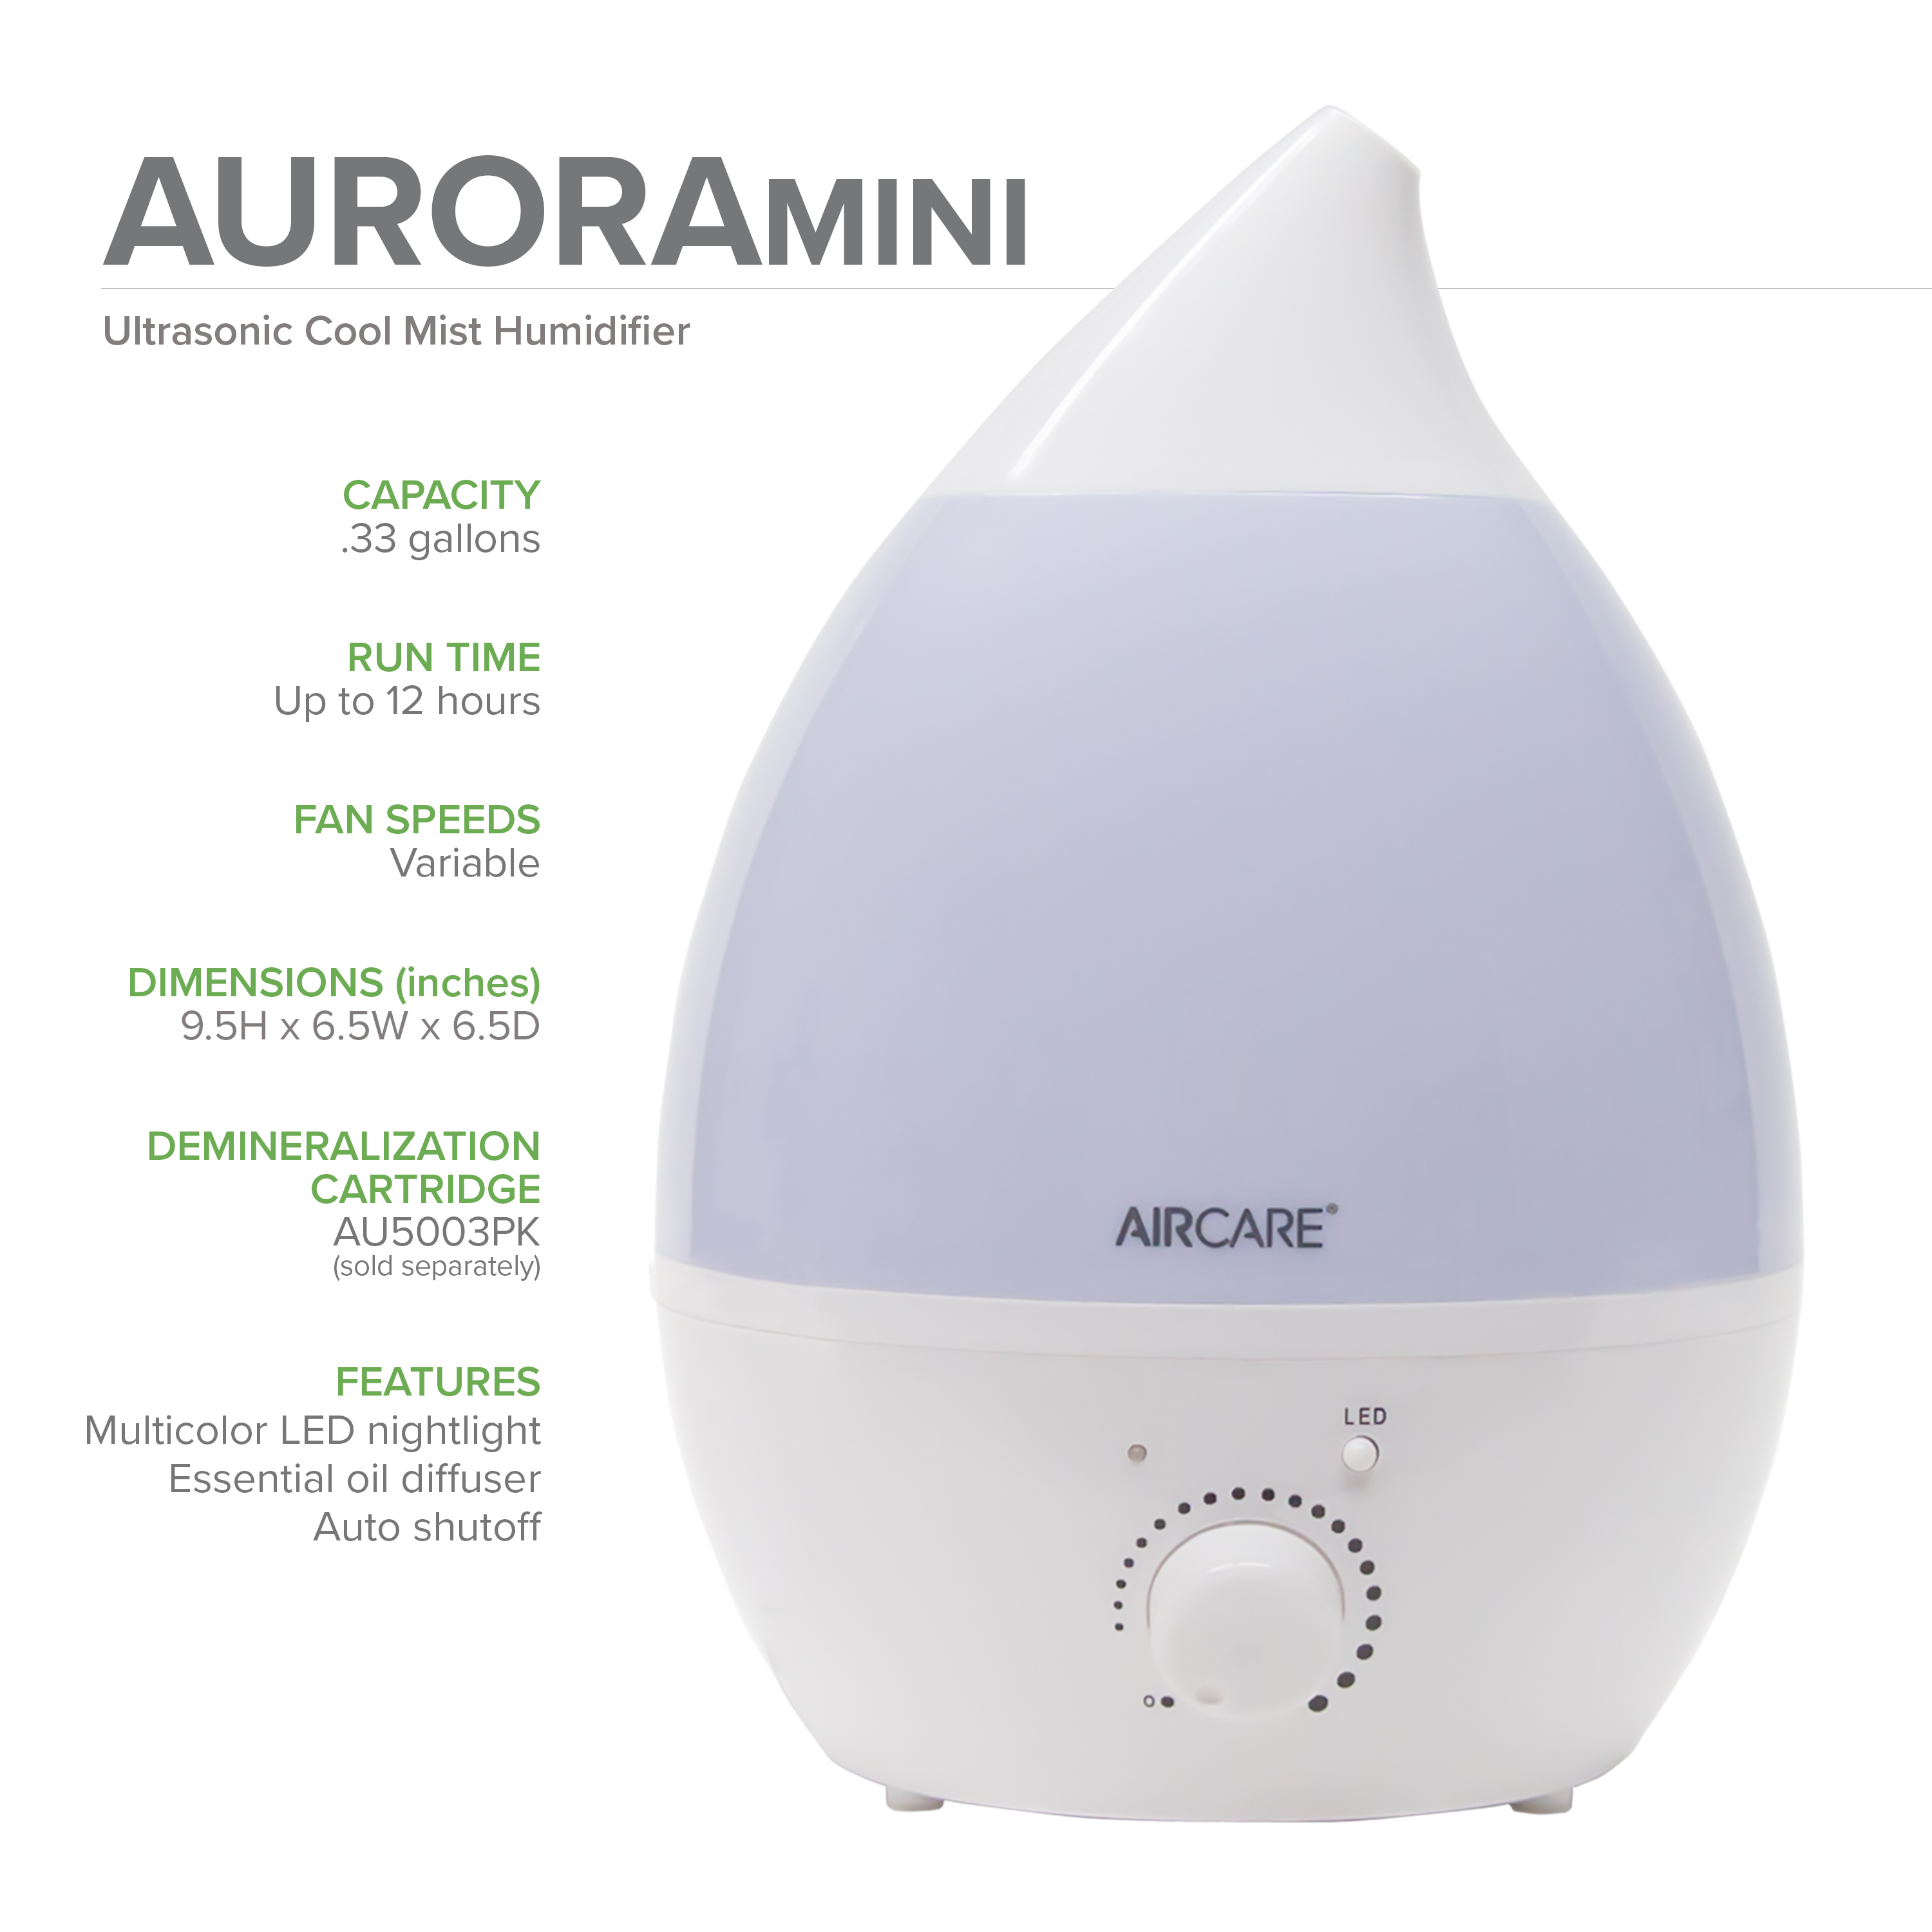 AIRCARE AUV10AWHT Aurora Mini Ultrasonic Humidifier with Aroma Diffuser and Multicolor LED Night Light, White - image 2 of 9